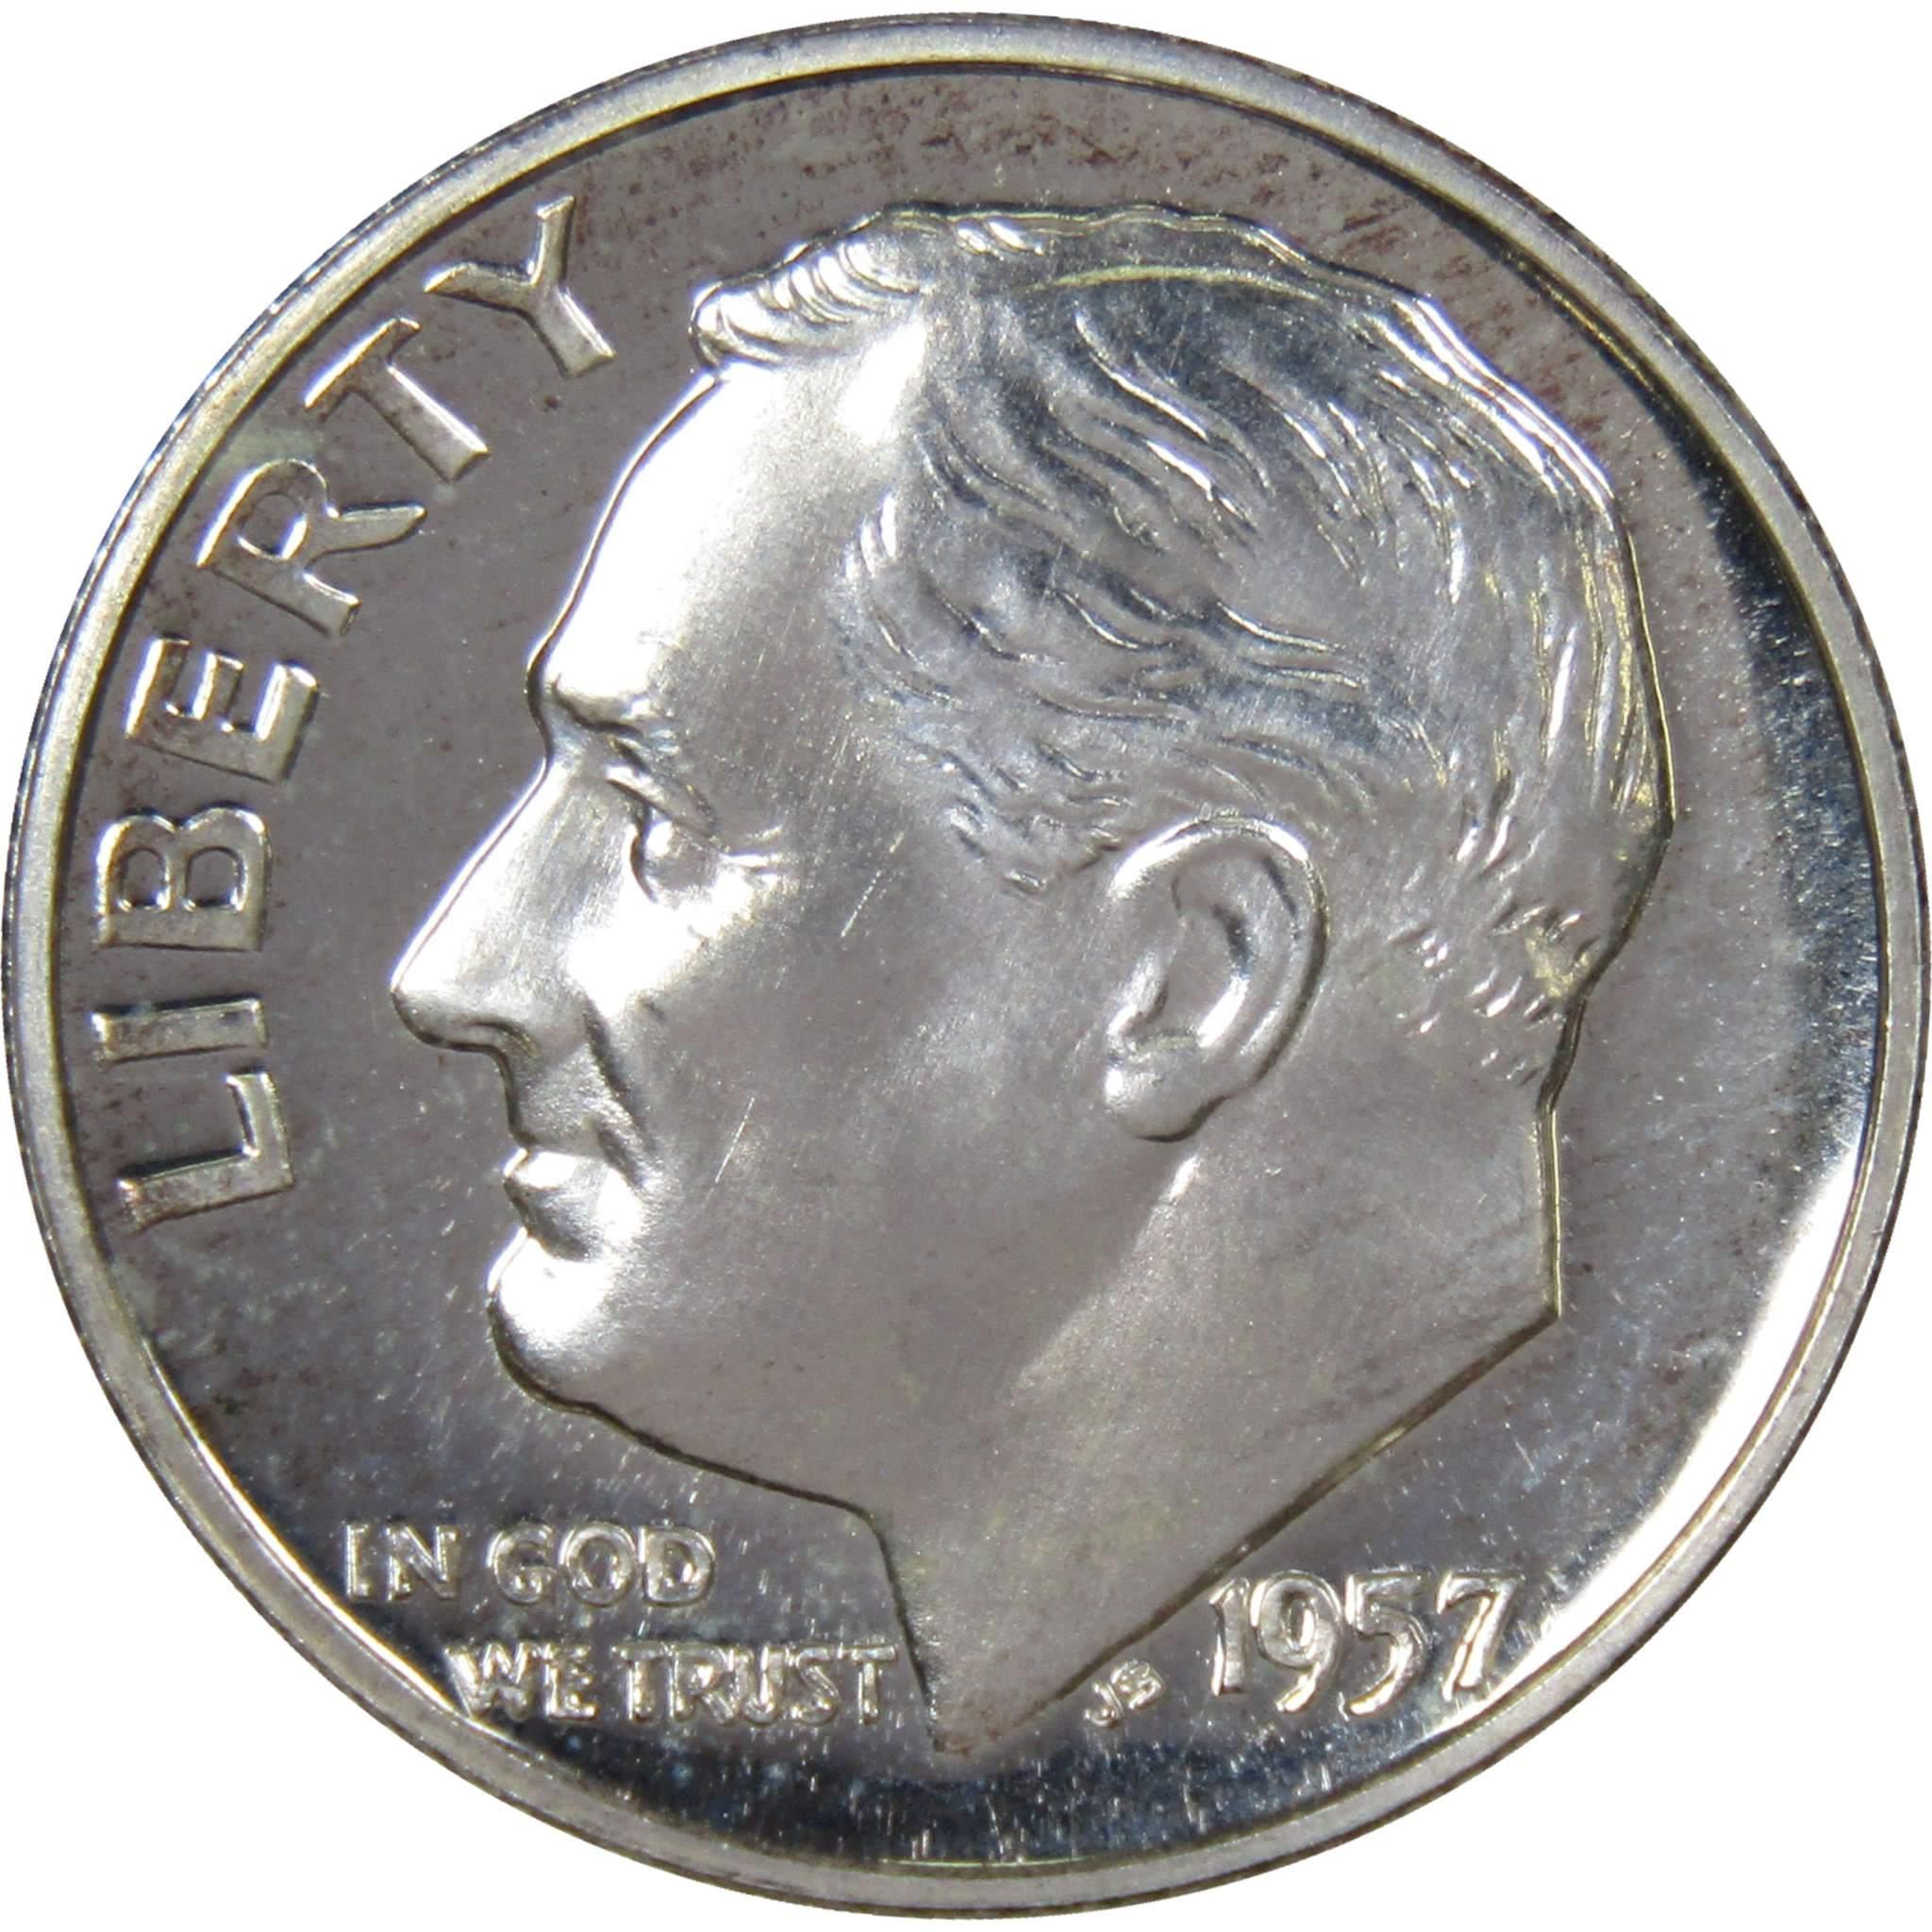 1957 Roosevelt Dime Choice Proof 90% Silver 10c US Coin Collectible